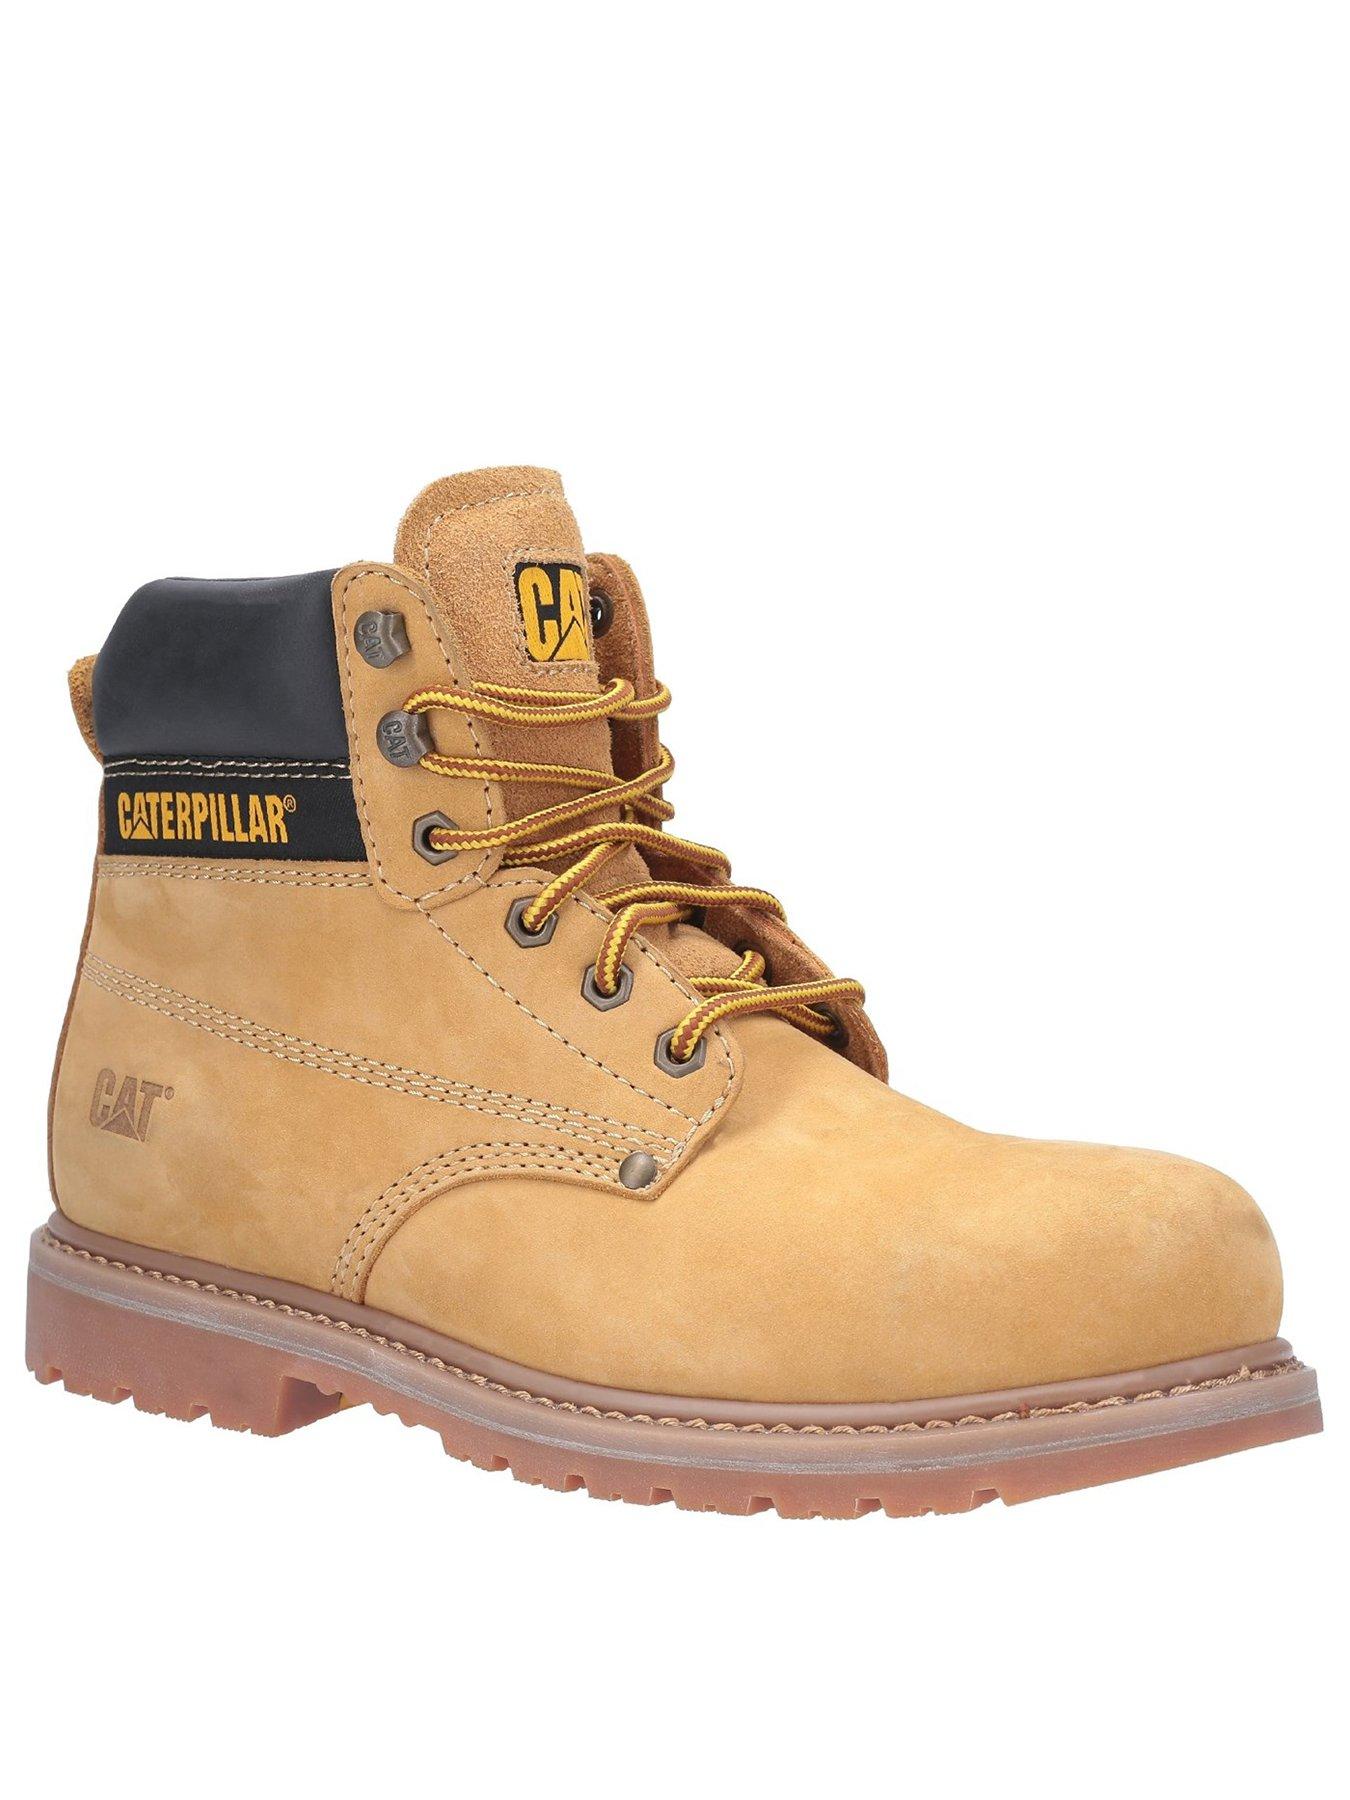 mens work boots on sale near me